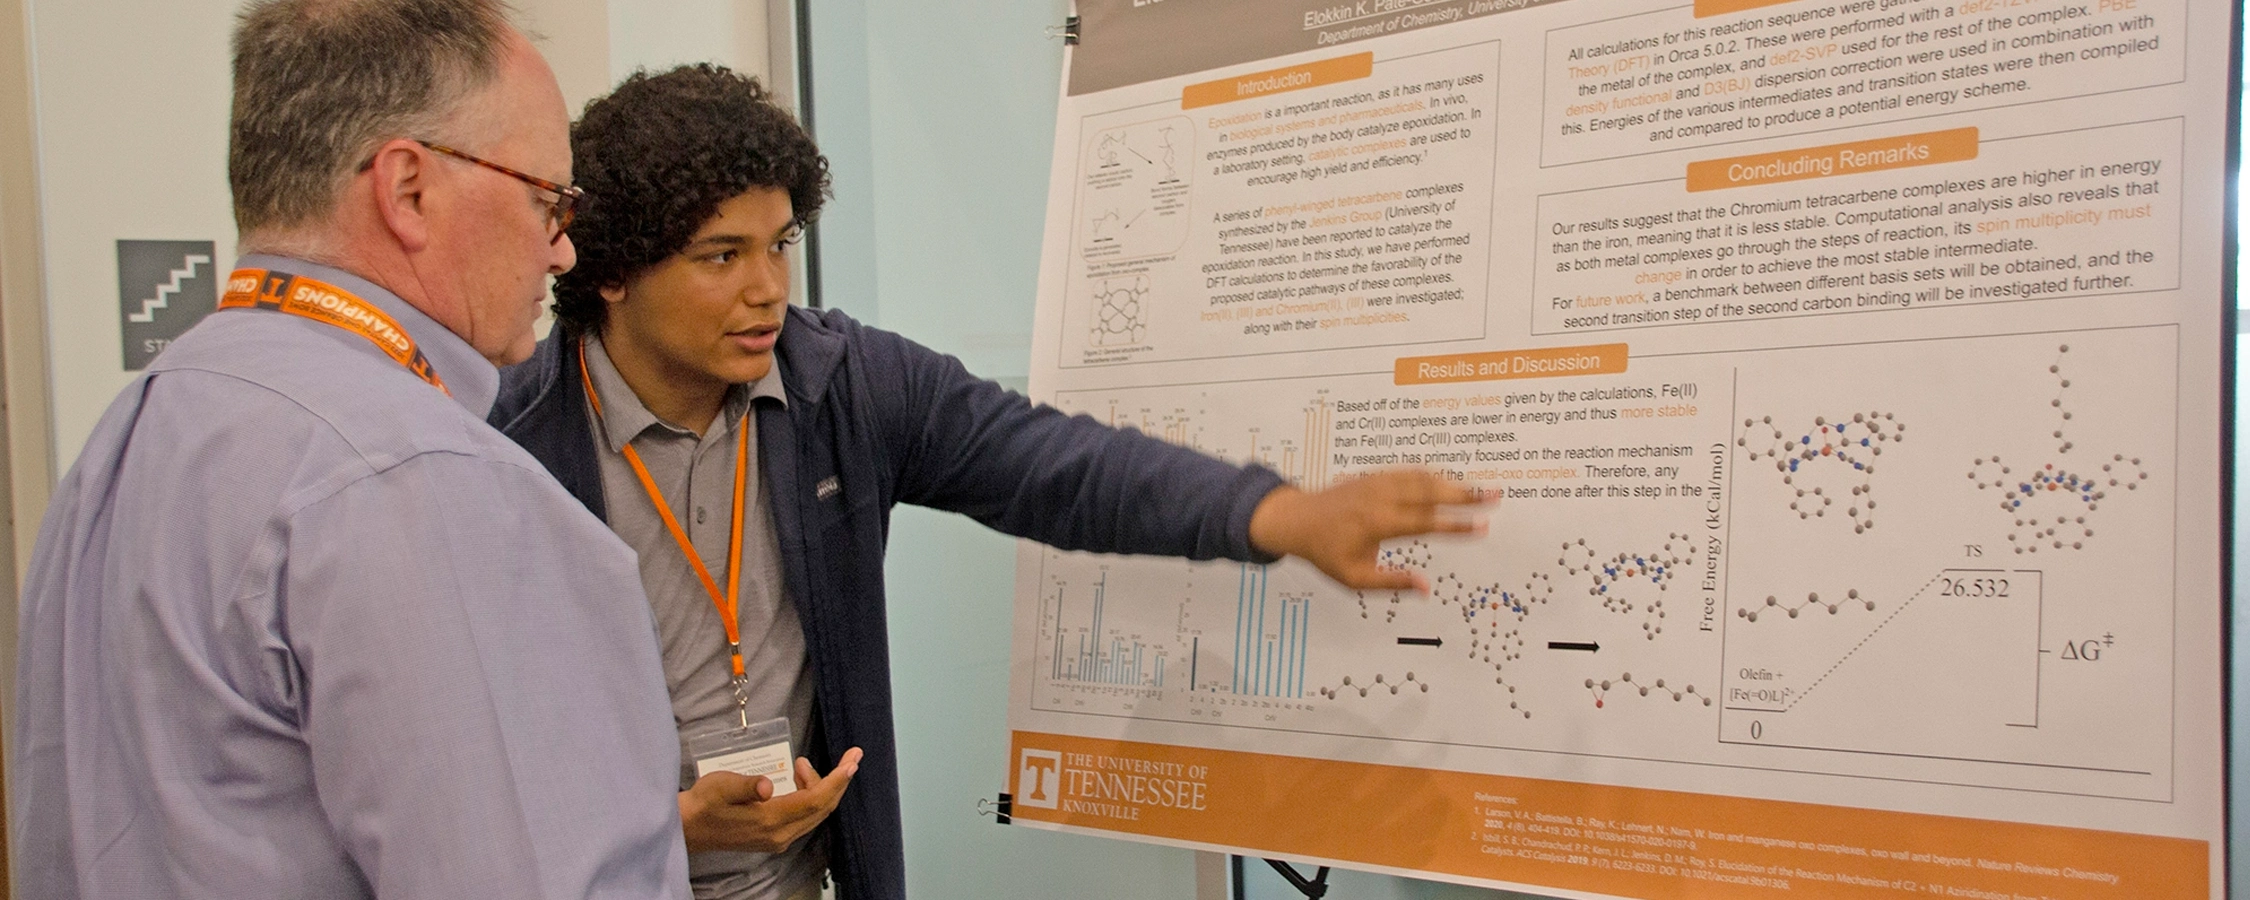 A student speaking with a professor points at a research poster